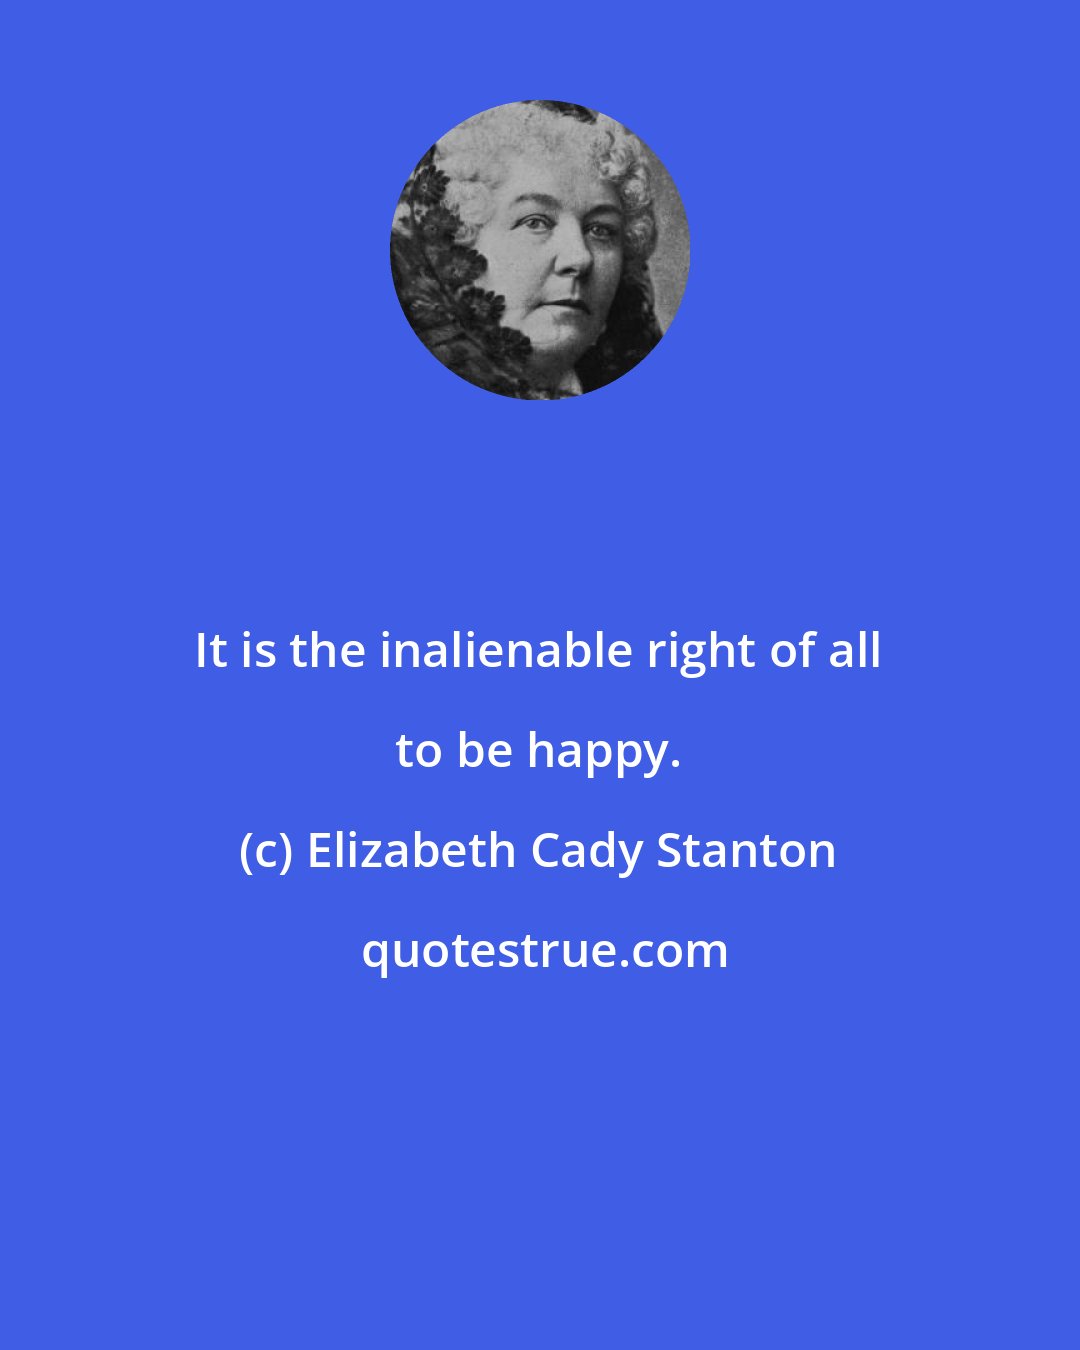 Elizabeth Cady Stanton: It is the inalienable right of all to be happy.